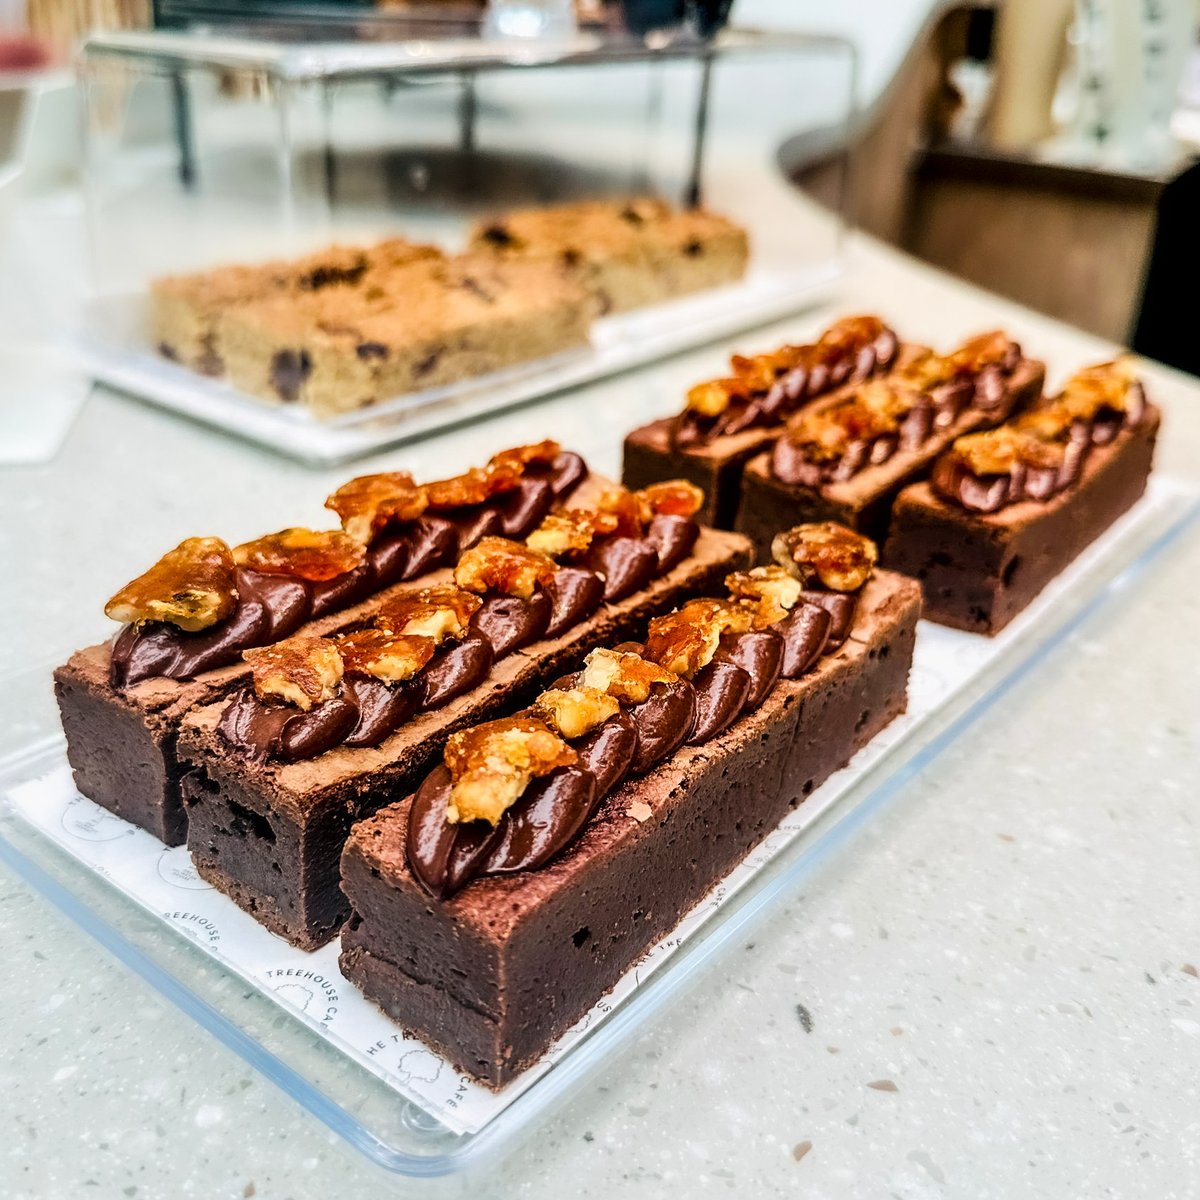 The perfect brownie slice 🤤 #eatwell #havefun #promisesdelivered